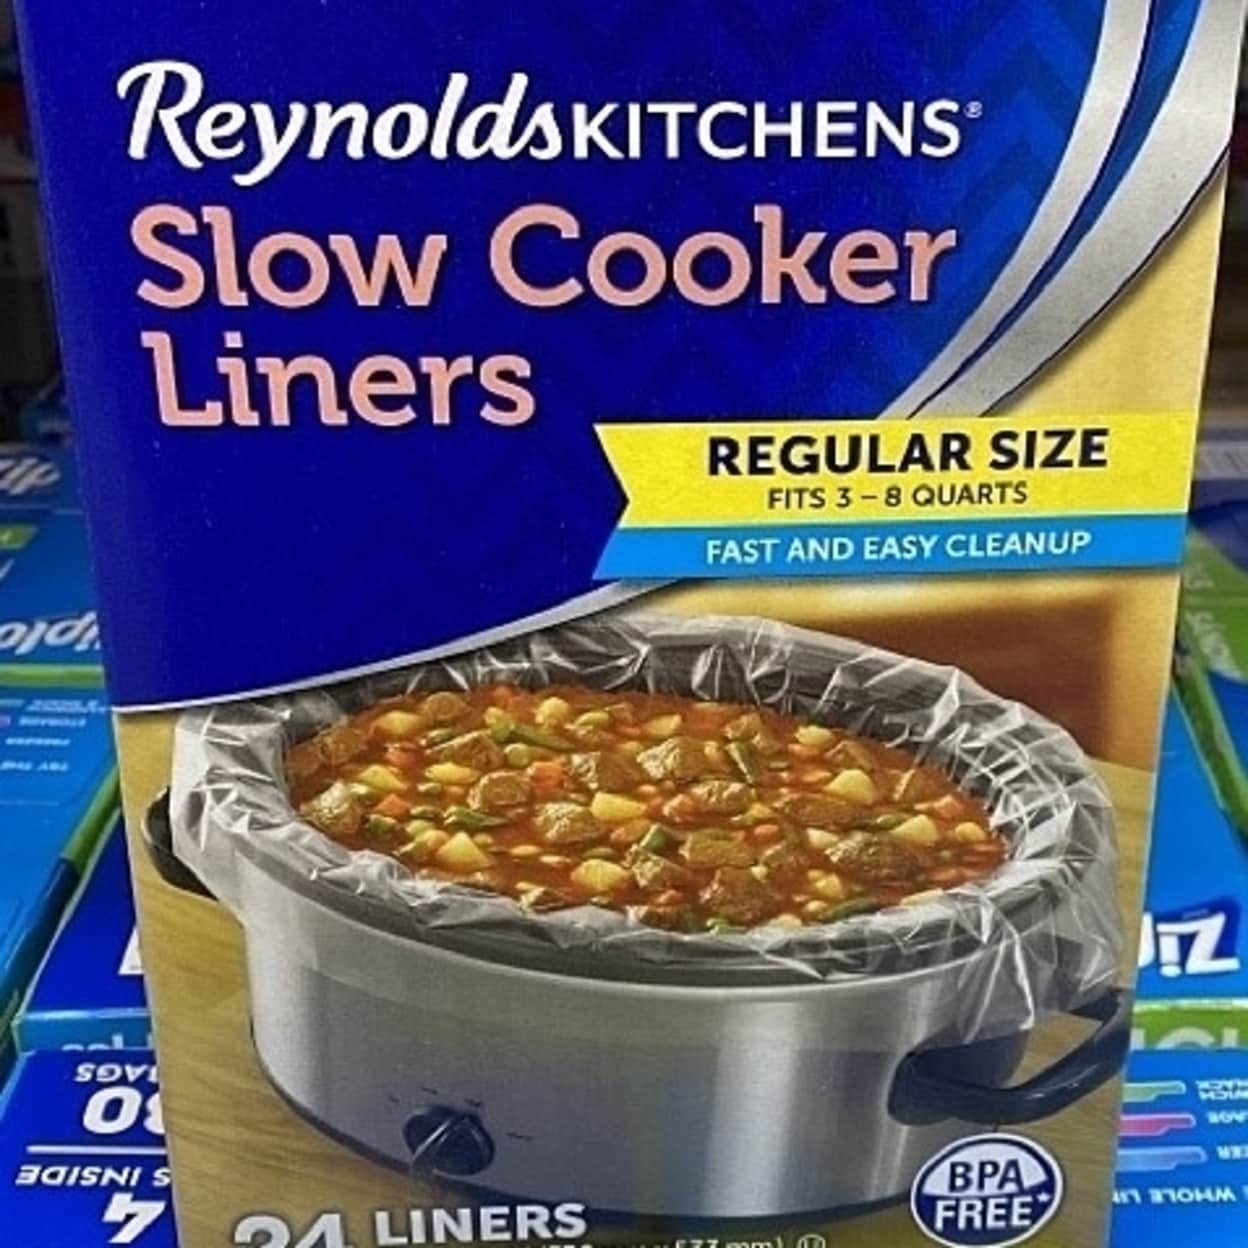 https://ak1.ostkcdn.com/images/products/is/images/direct/1d0ab7c9aa8ffee5fb2853d165675f064e7ee58f/Reynolds-Slow-Cooker-Liners%2C-24-Pack.jpg